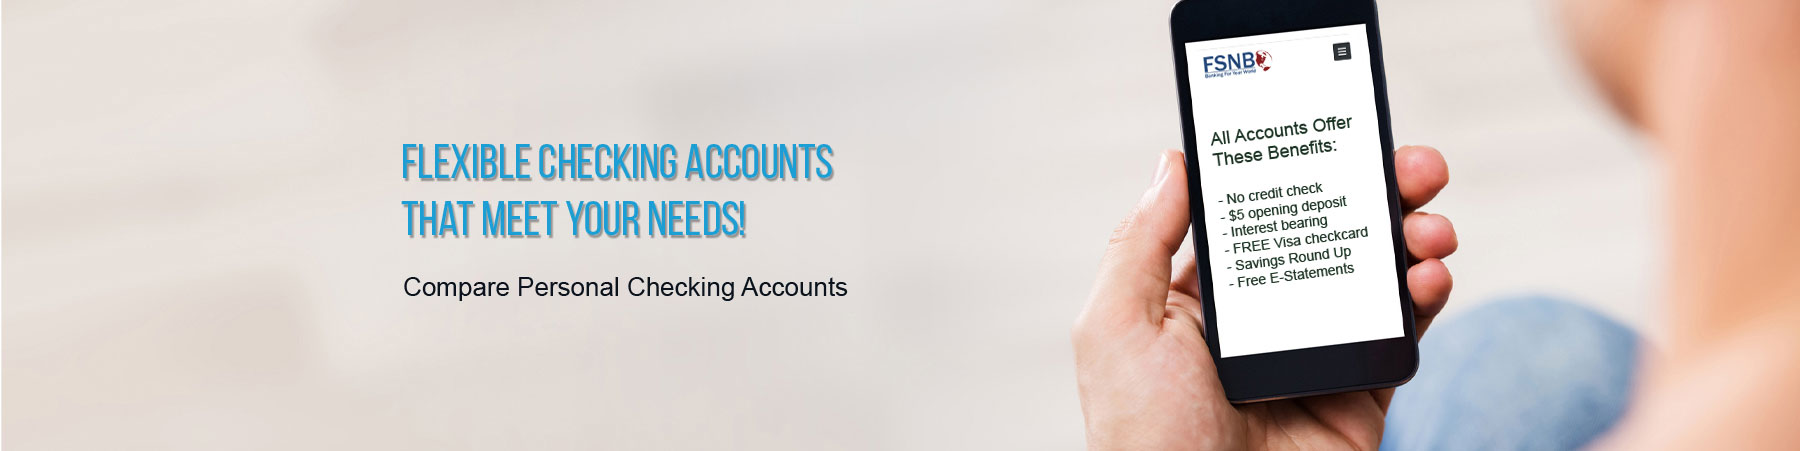 NB has flexible checking accounts to meet your financial needs. Open an account today!